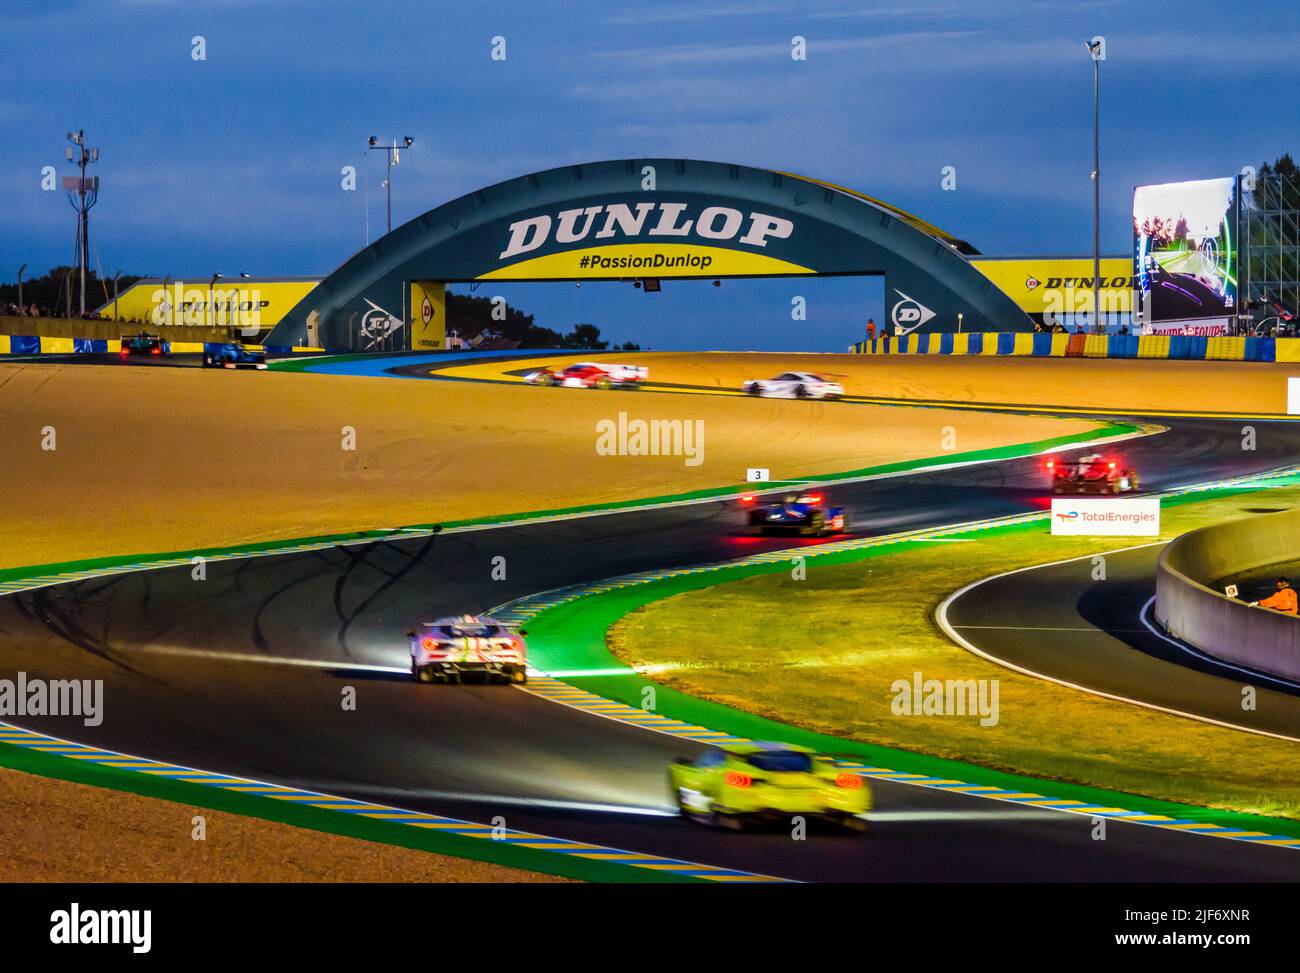 Race cars handle the Dunlop chicane at night before passing under the Dunlop footbridge on the Circuit de la Sarthe during the 24 hours of Le Mans. Stock Photo